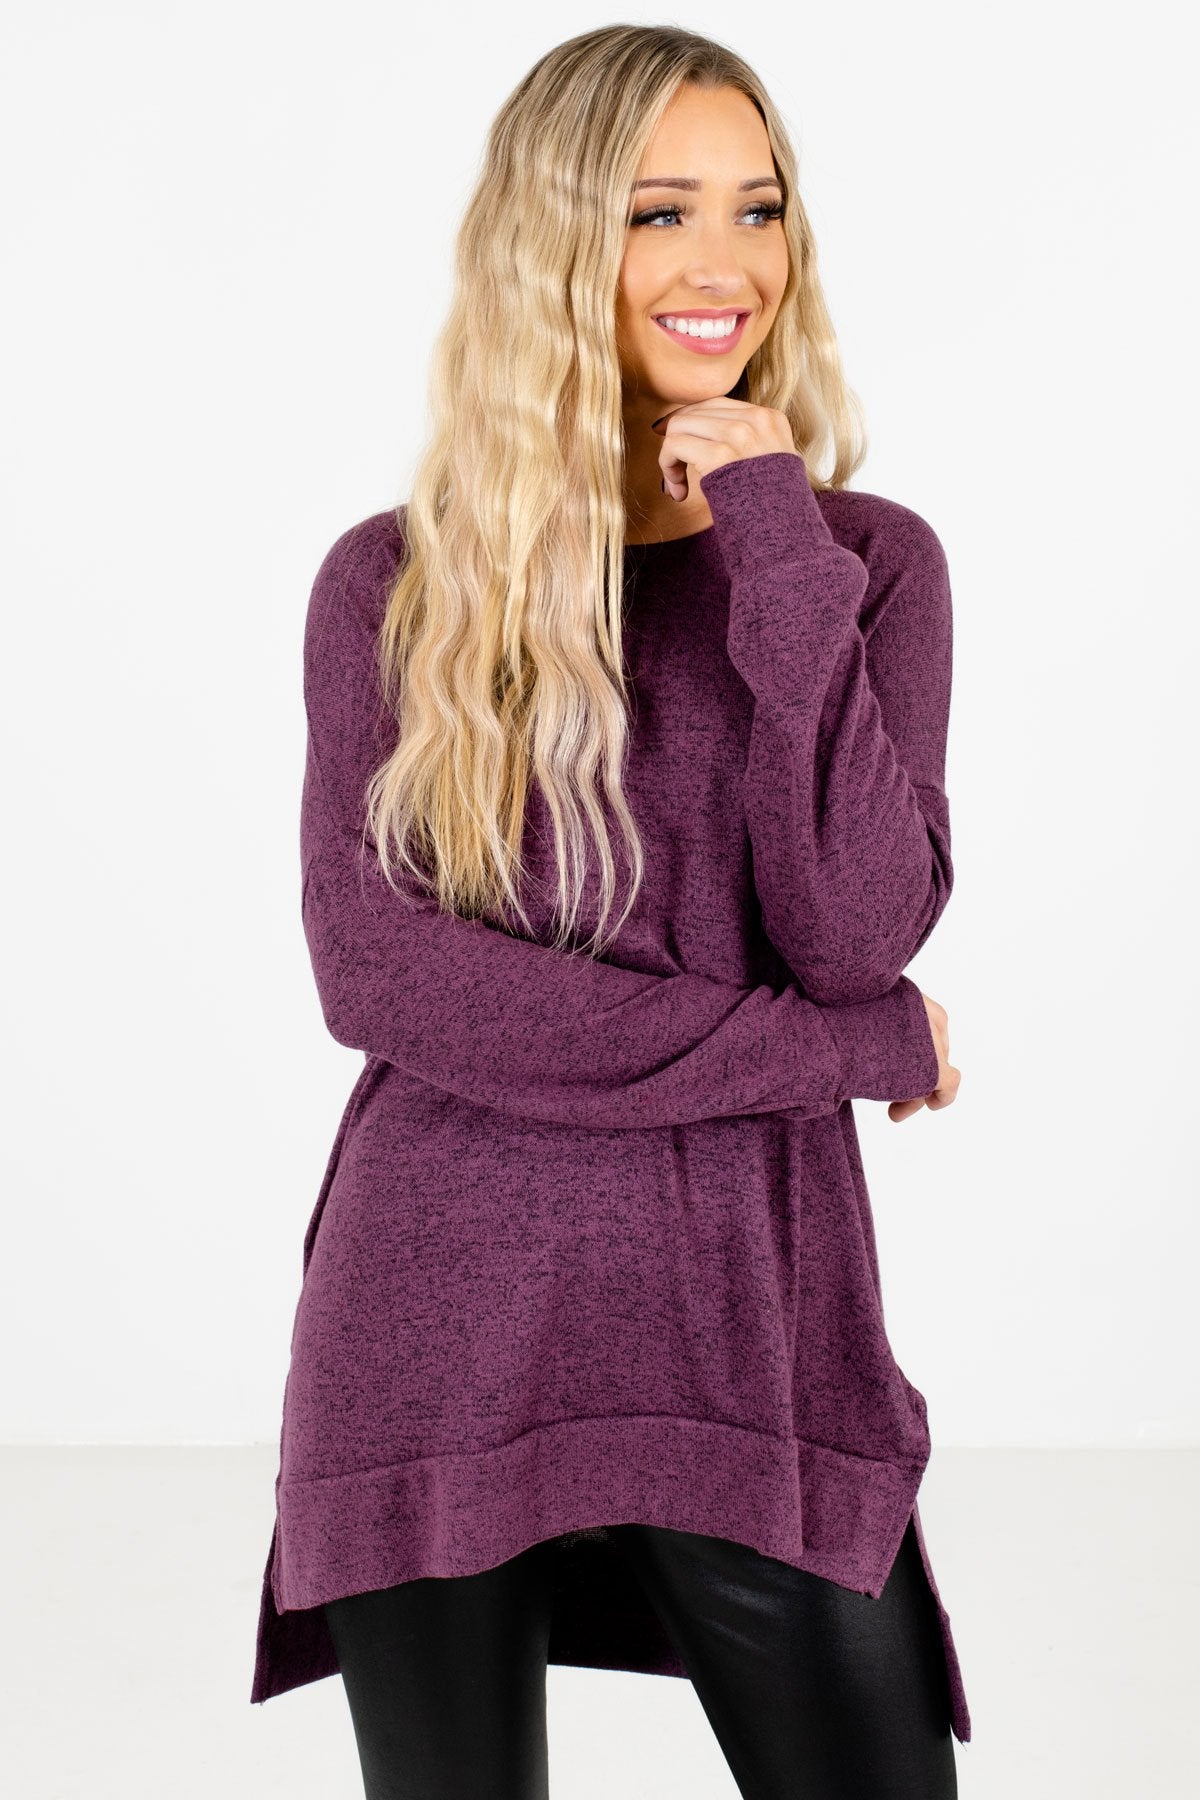 Women’s Purple Warm and Cozy Boutique Clothing